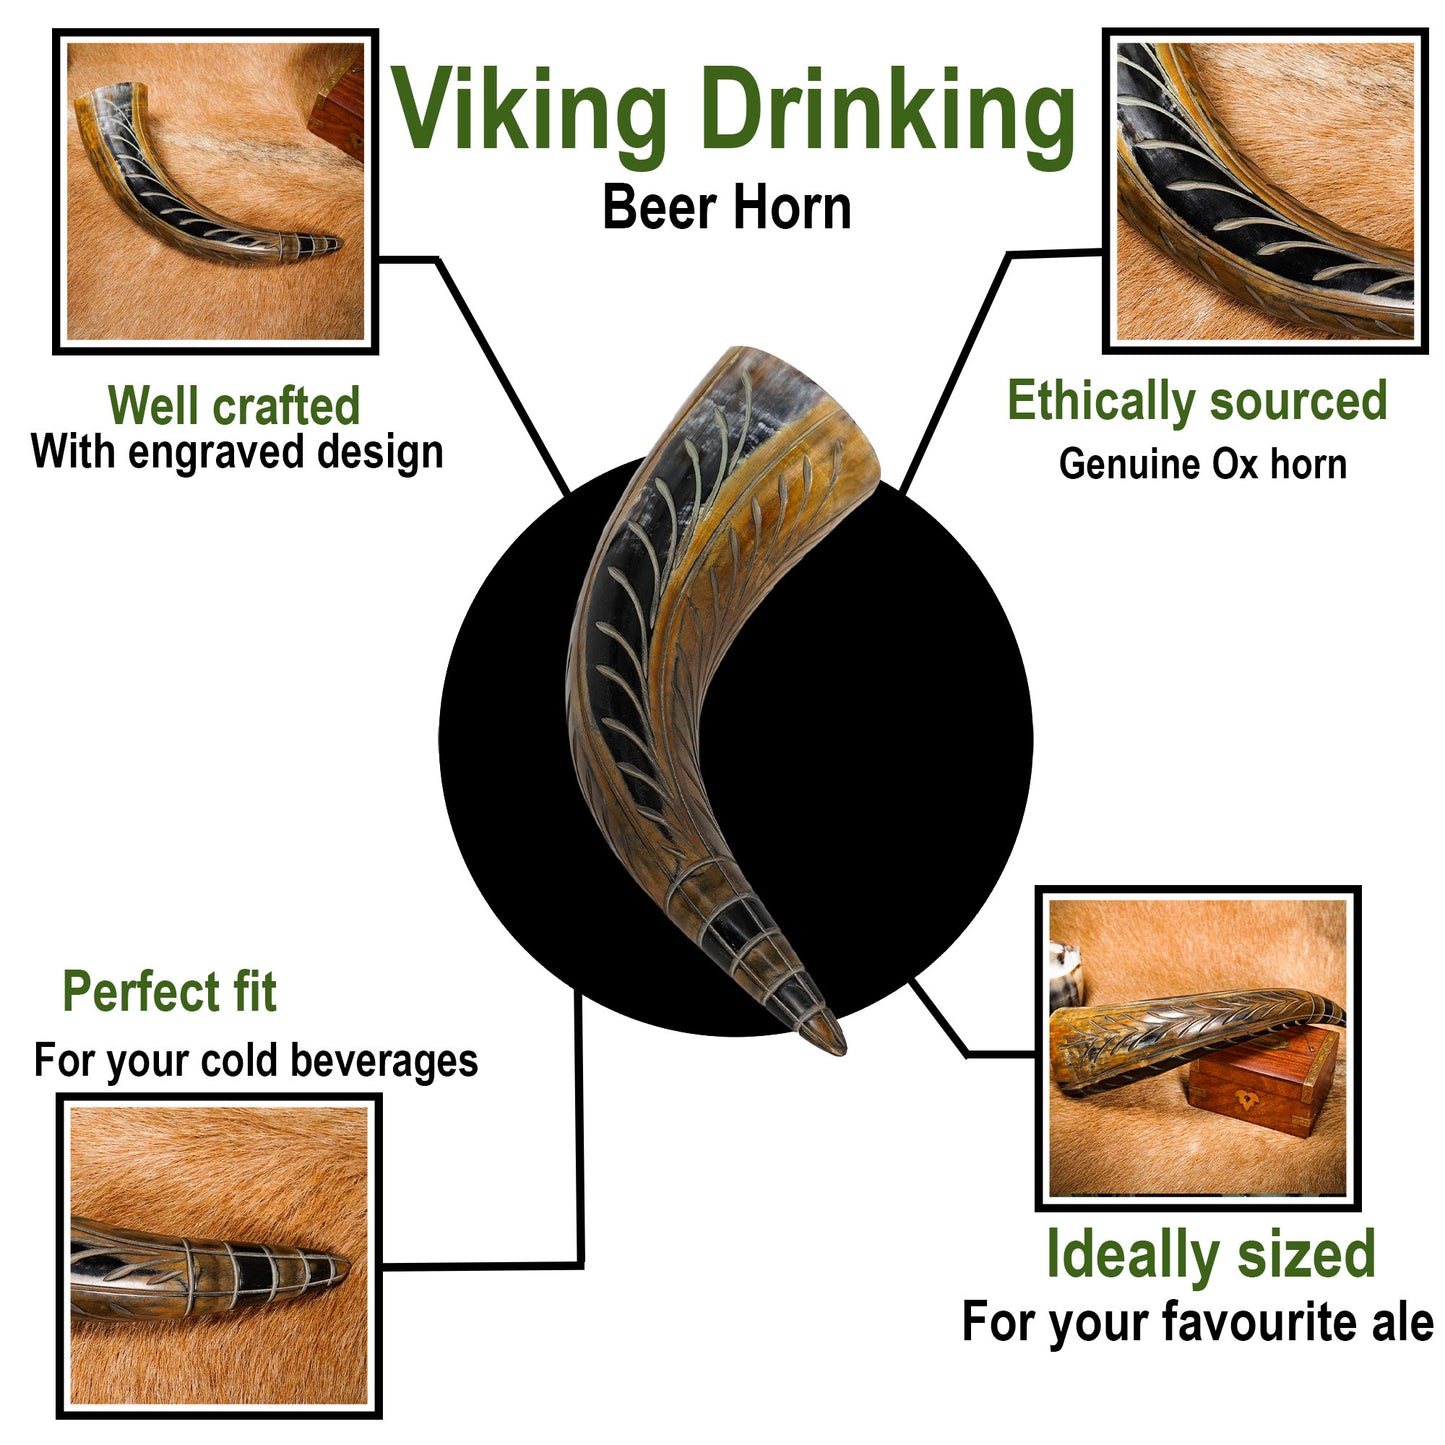 Black and Tan Engraved Drinking Horn - Real Ox Horn